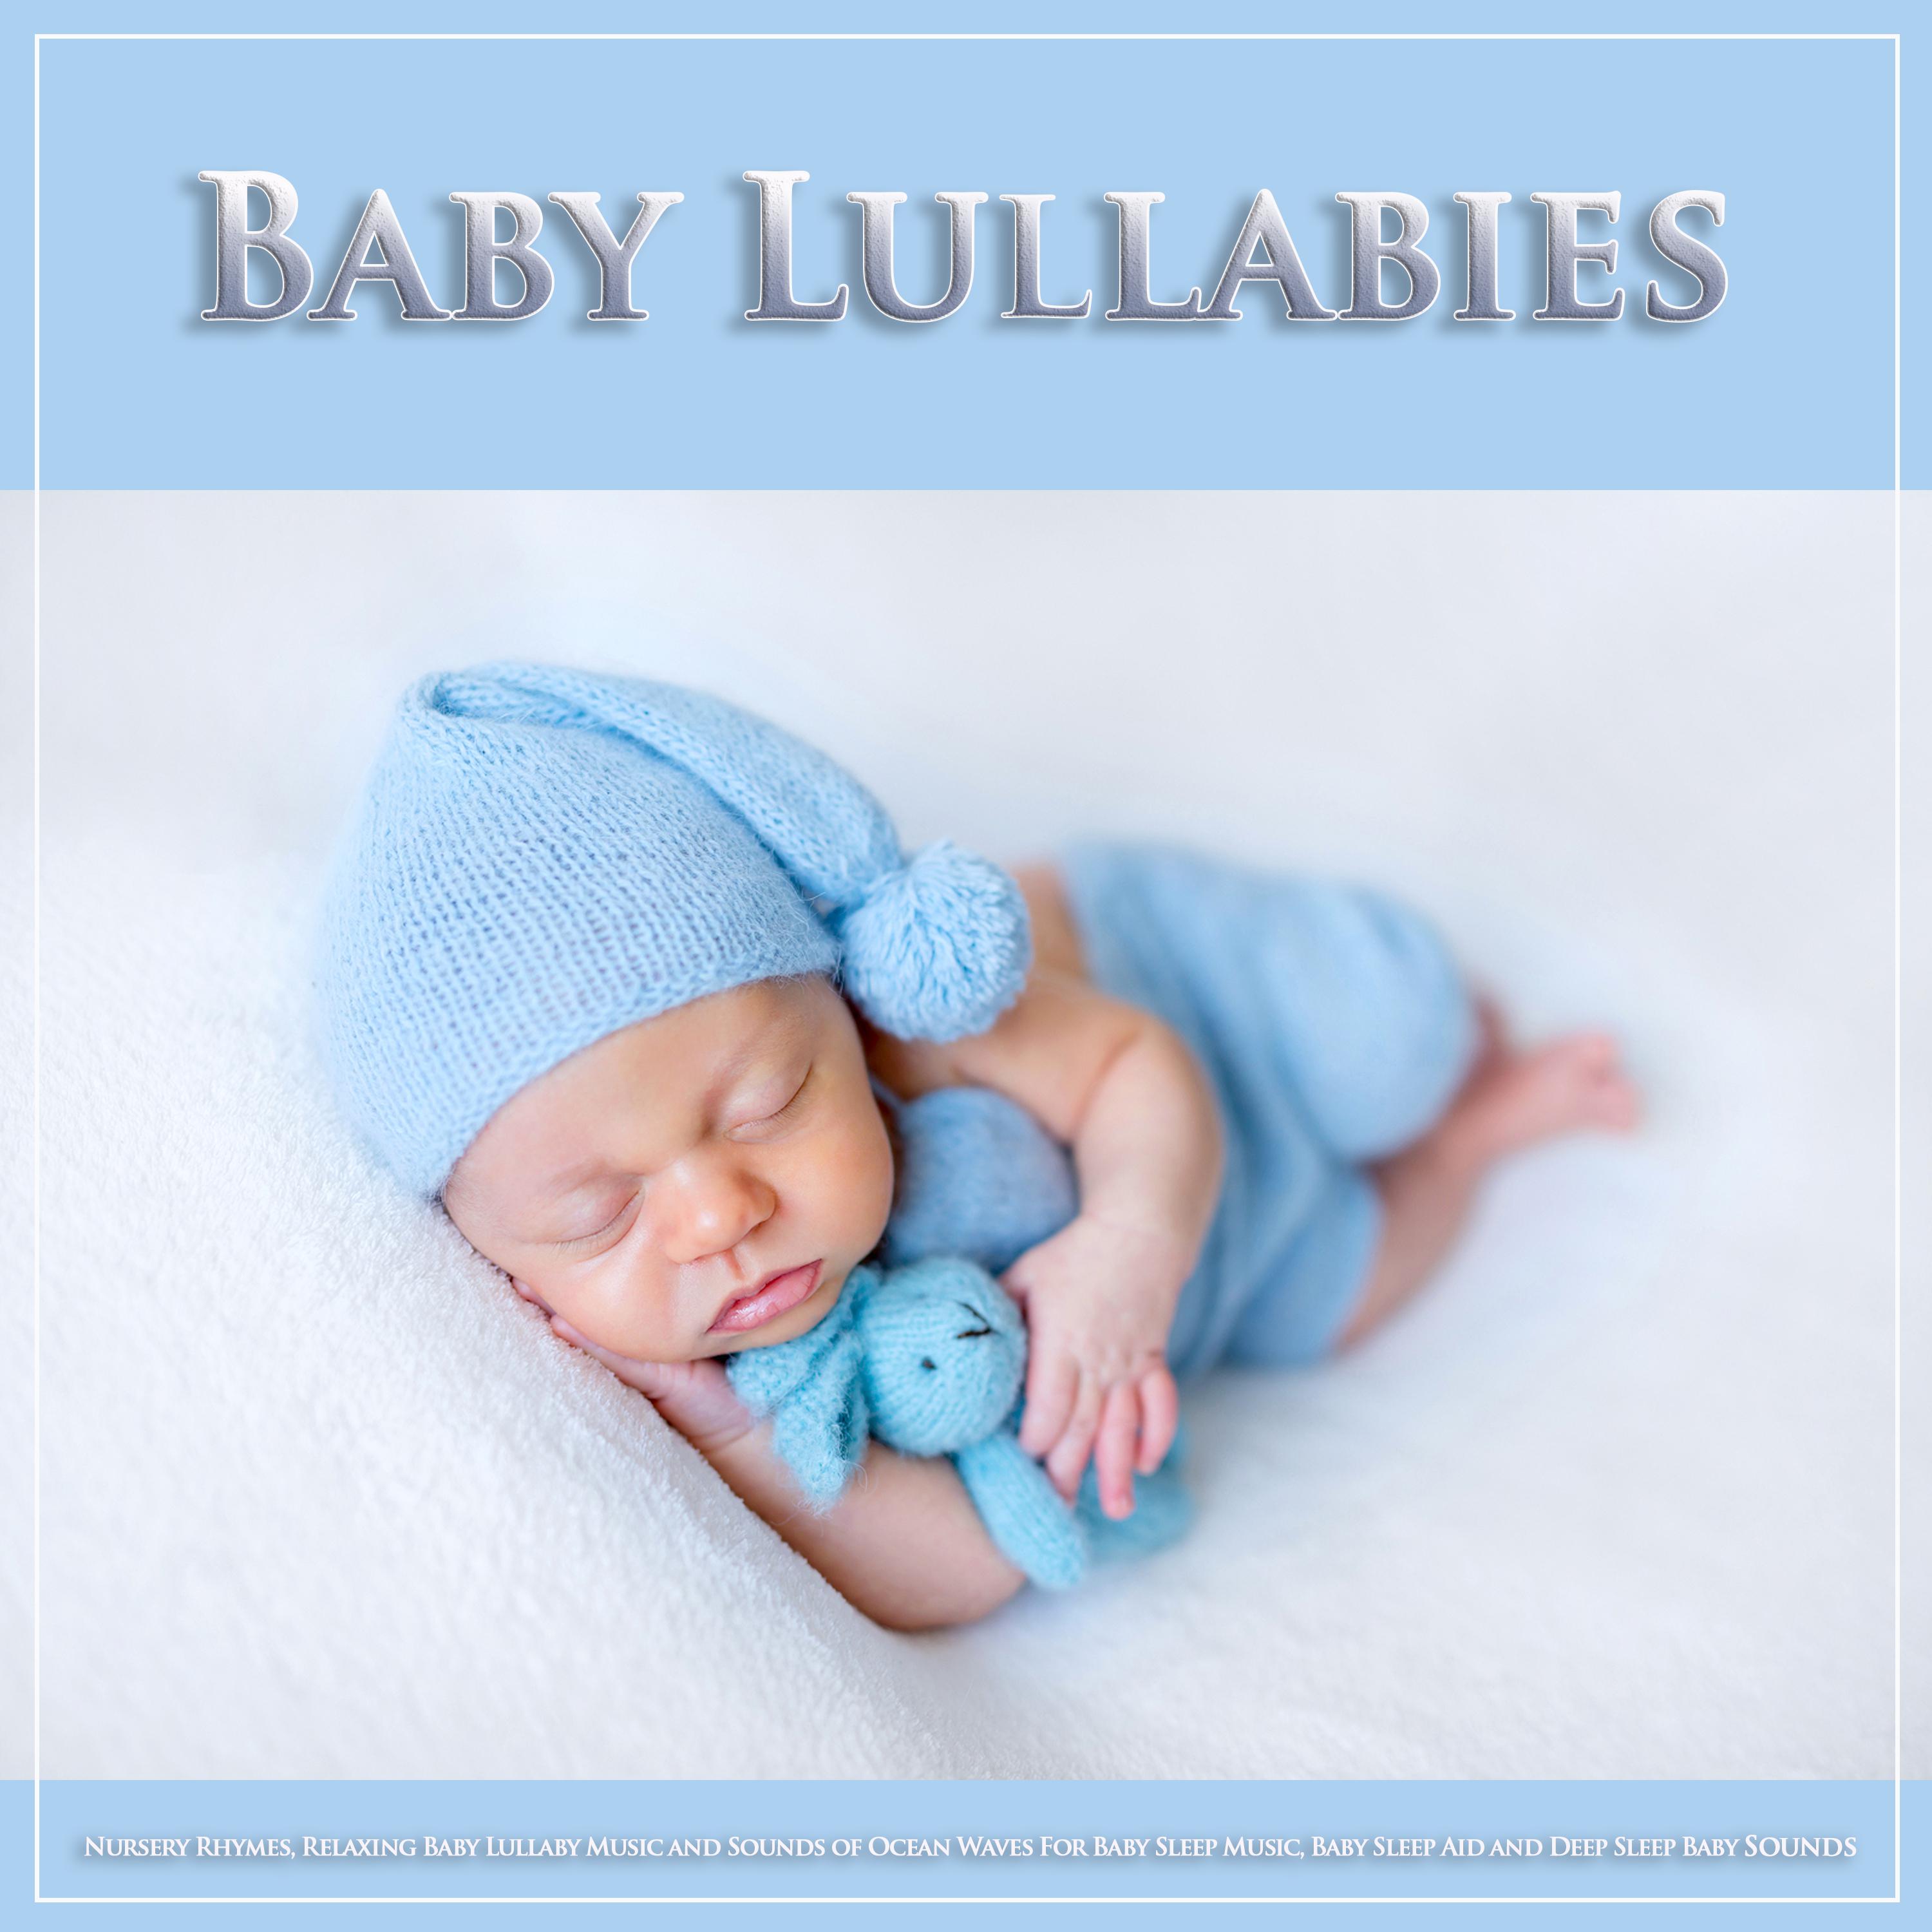 Baby Lullabies: Nursery Rhymes, Relaxing Baby Lullaby Music and Sounds of Ocean Waves For Baby Sleep Music, Baby Sleep Aid and Deep Sleep Baby Sounds